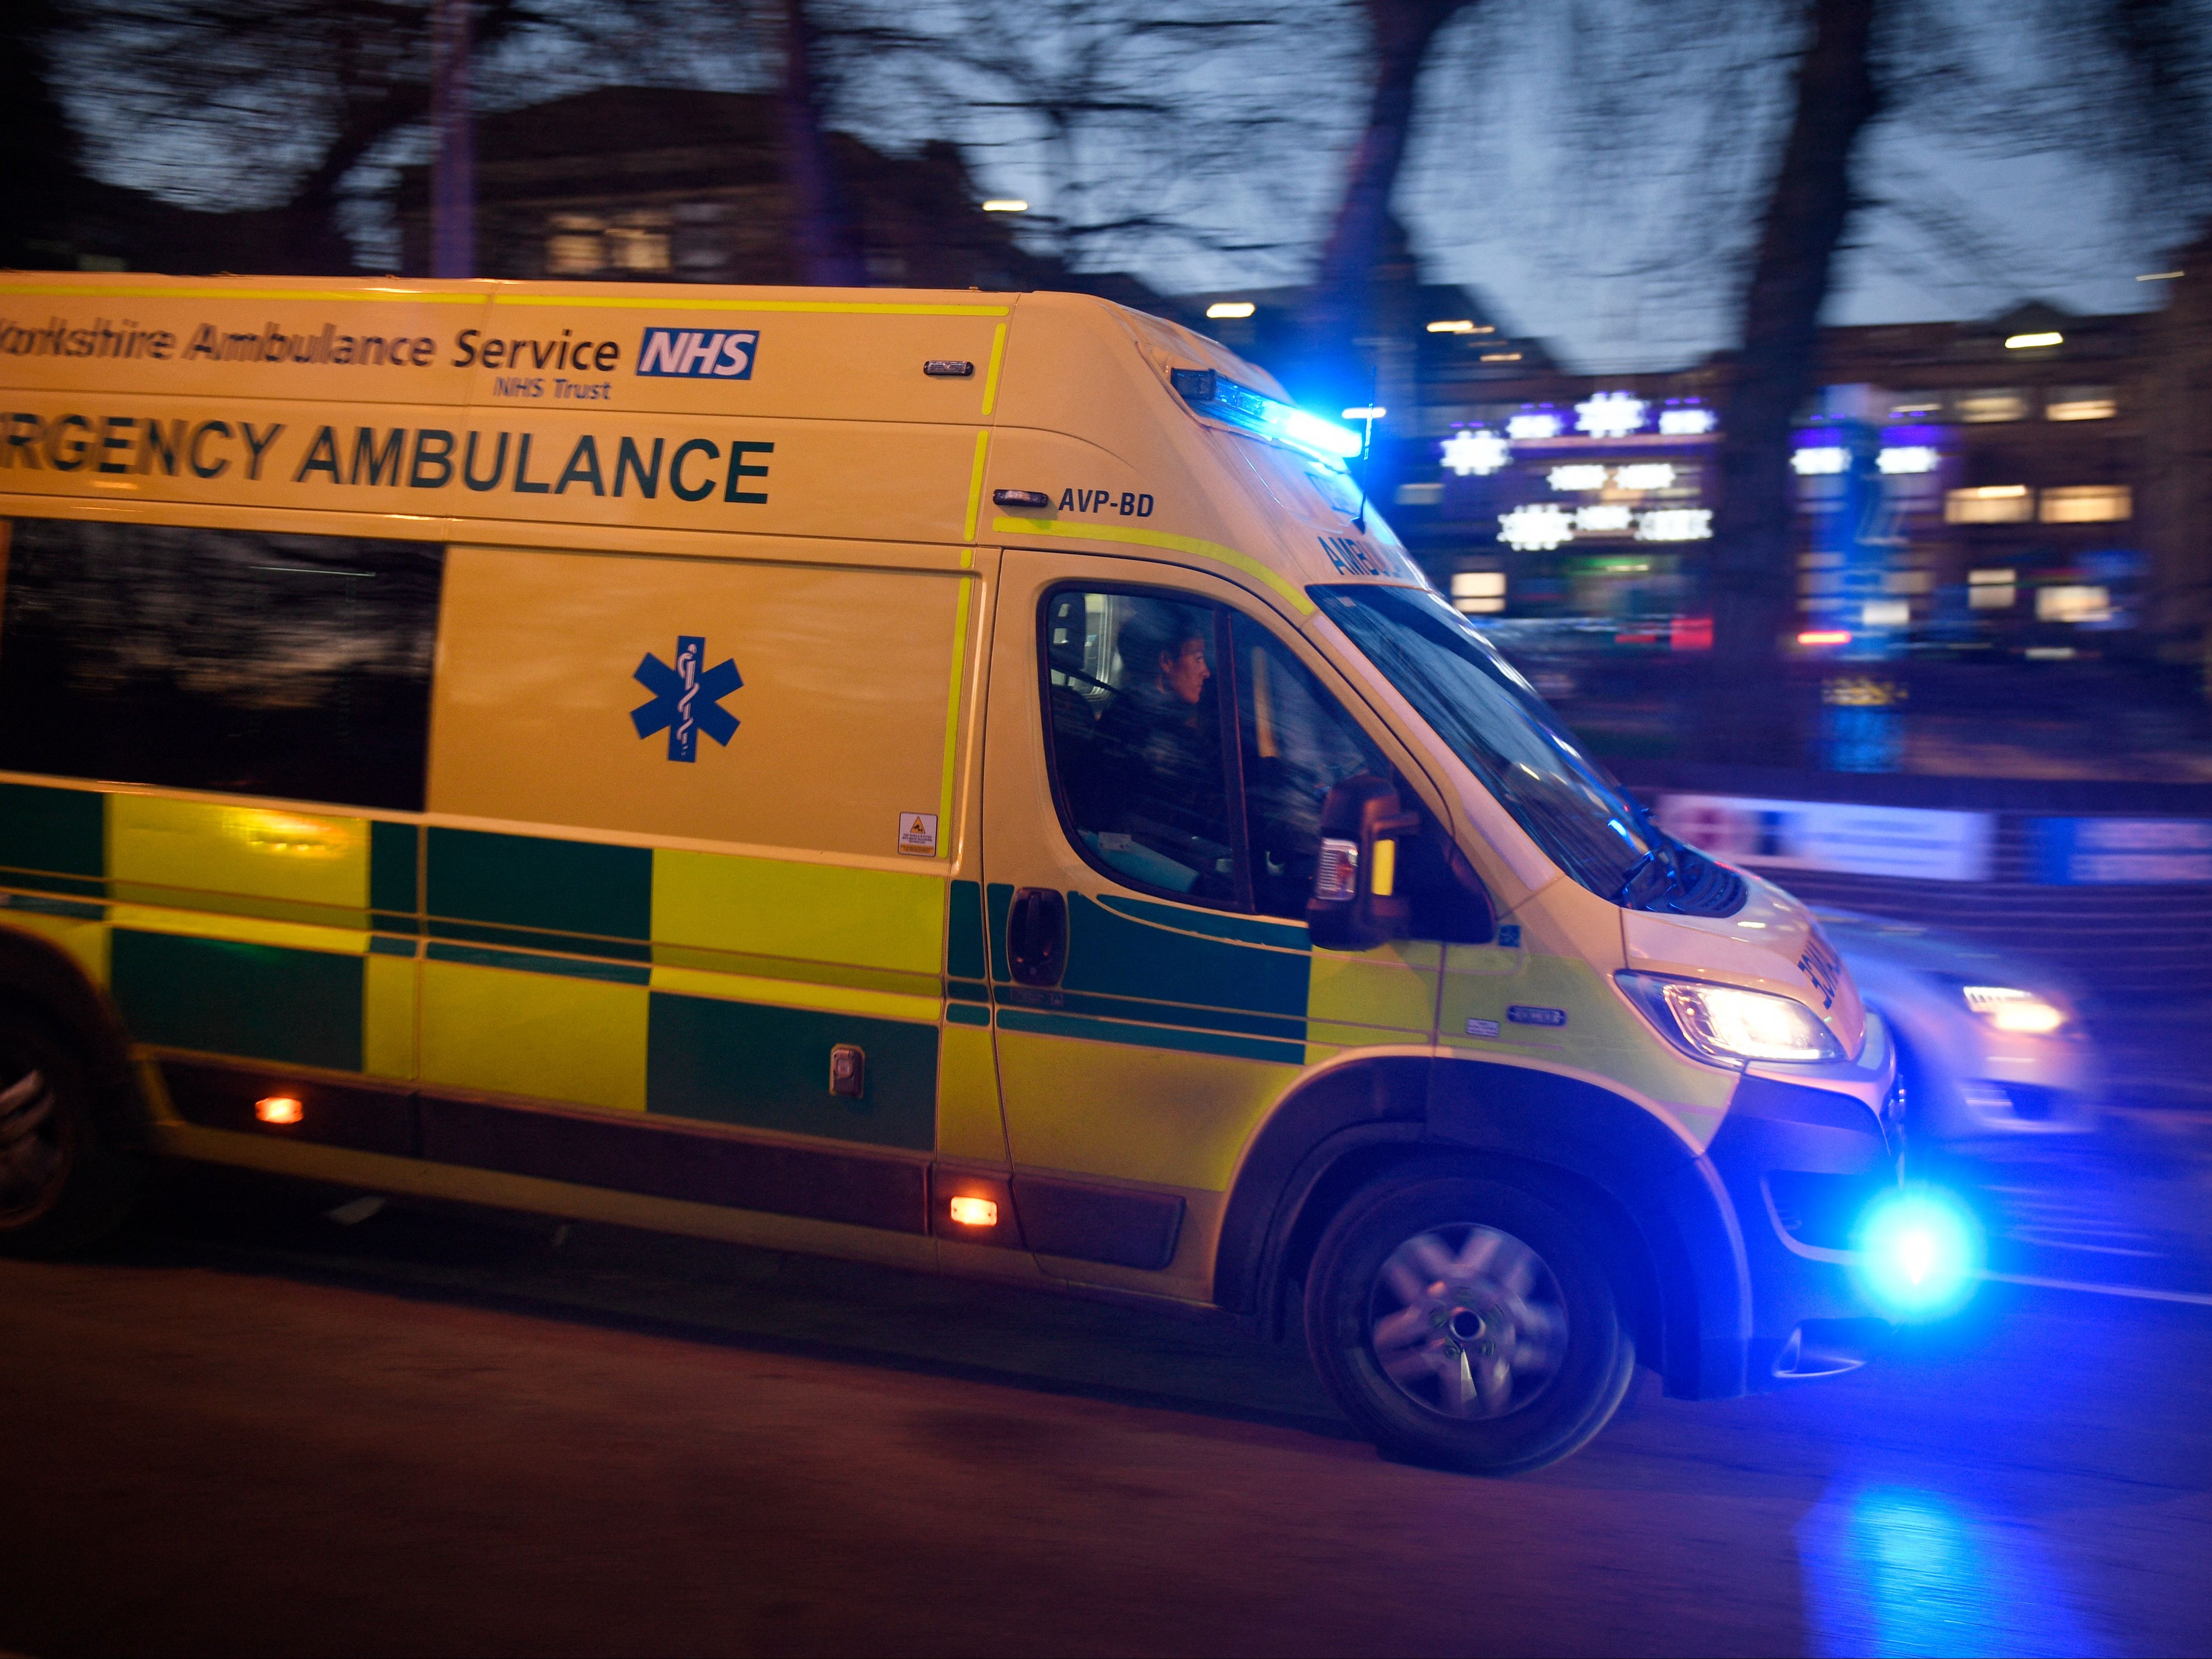 One paramedic said he was strangled by a patient and nearly stabbed by another while trying to help them